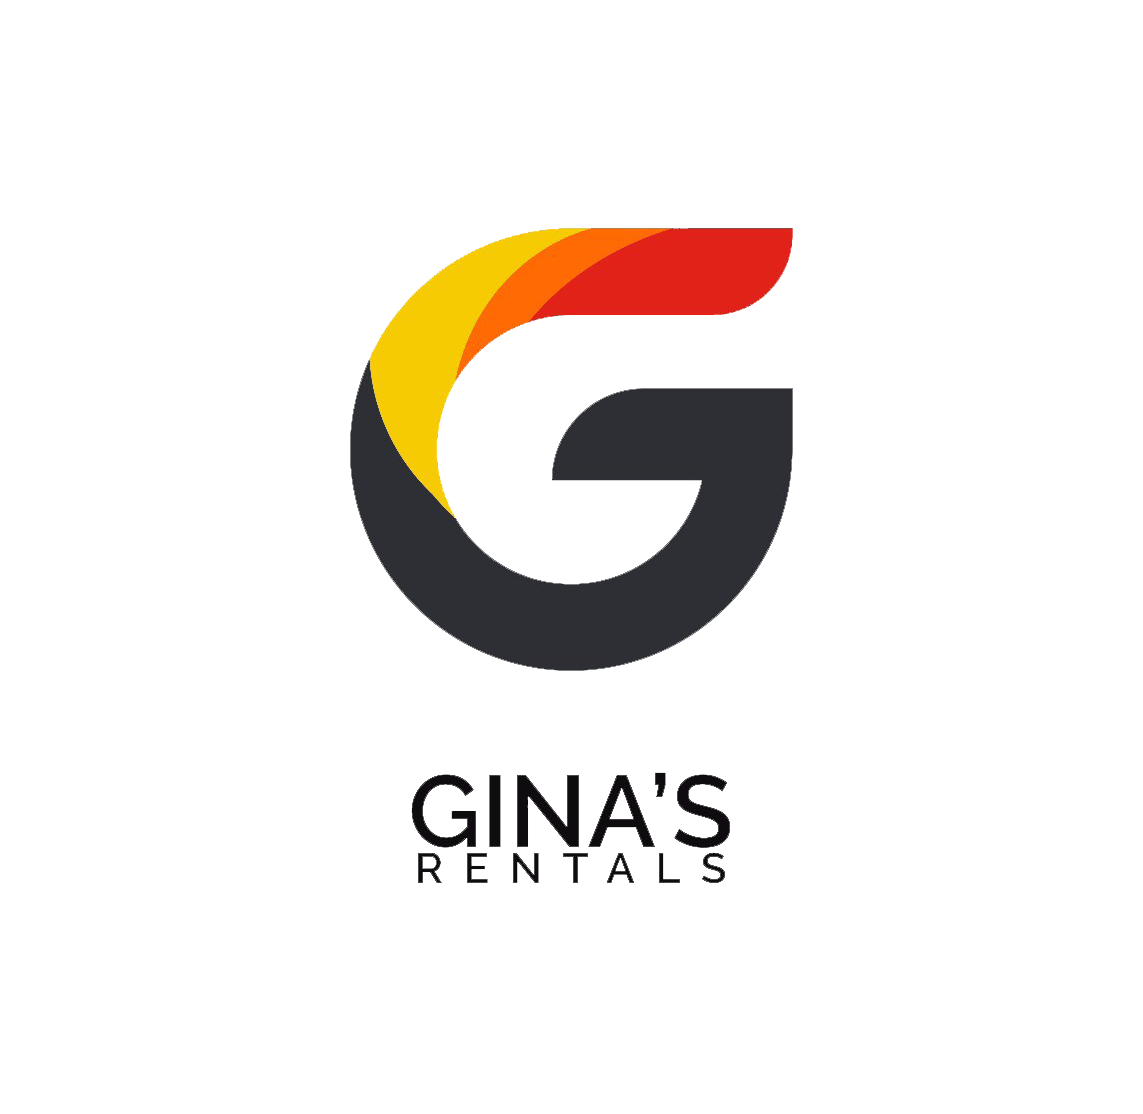 Gina's Rentals Limited